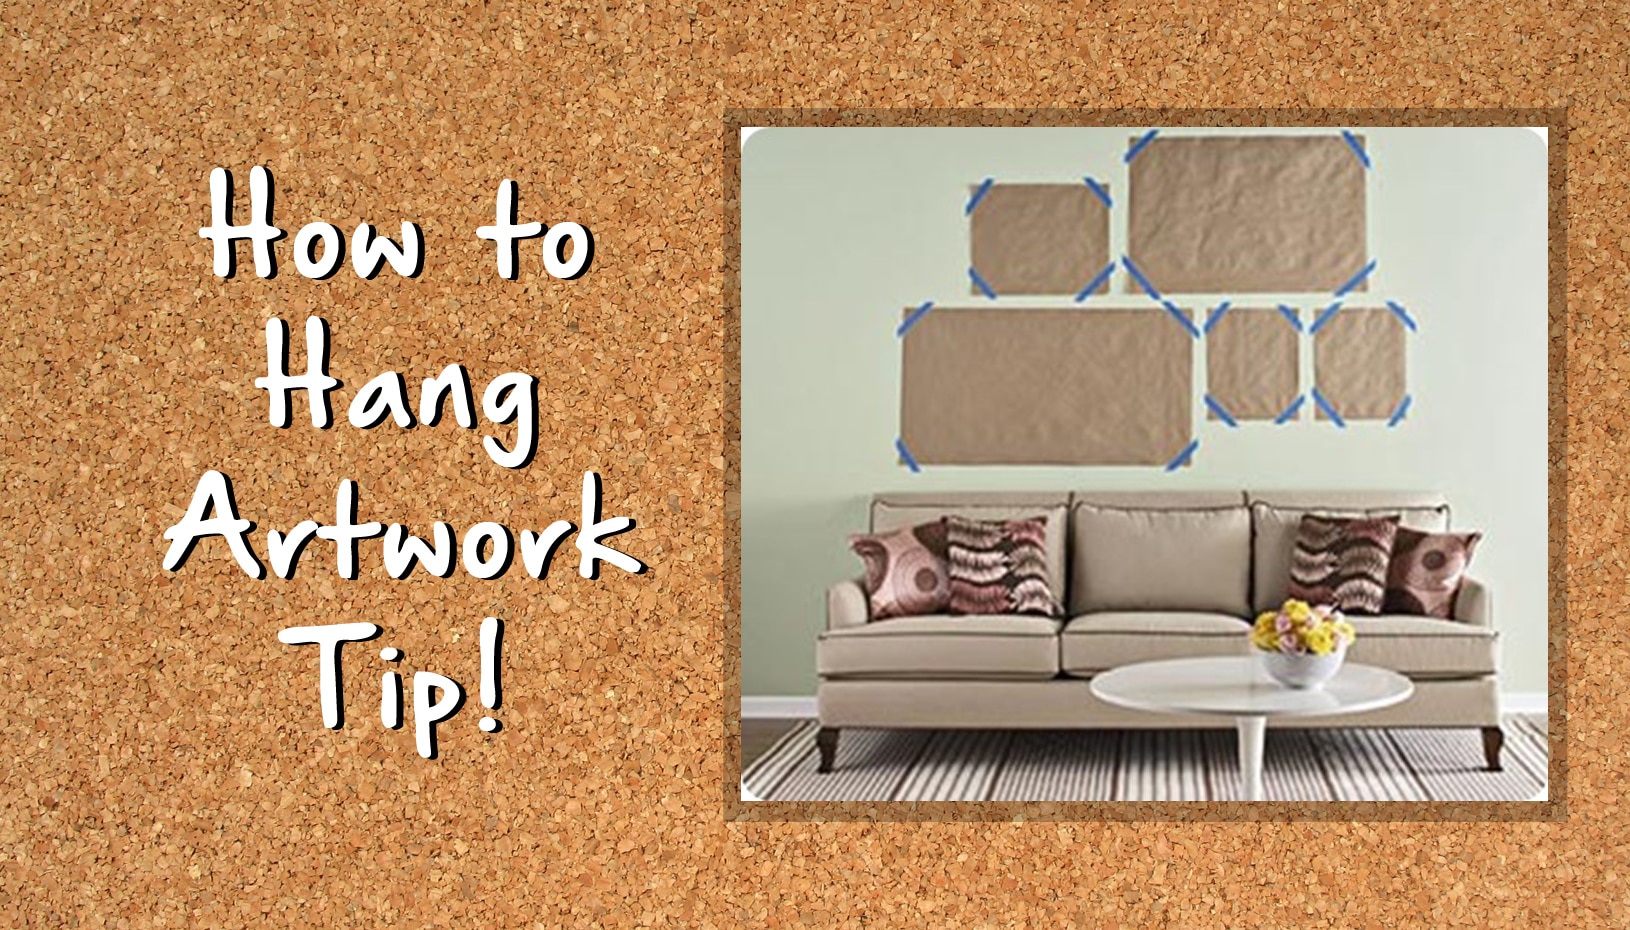 How to Hang Pictures on a Wall